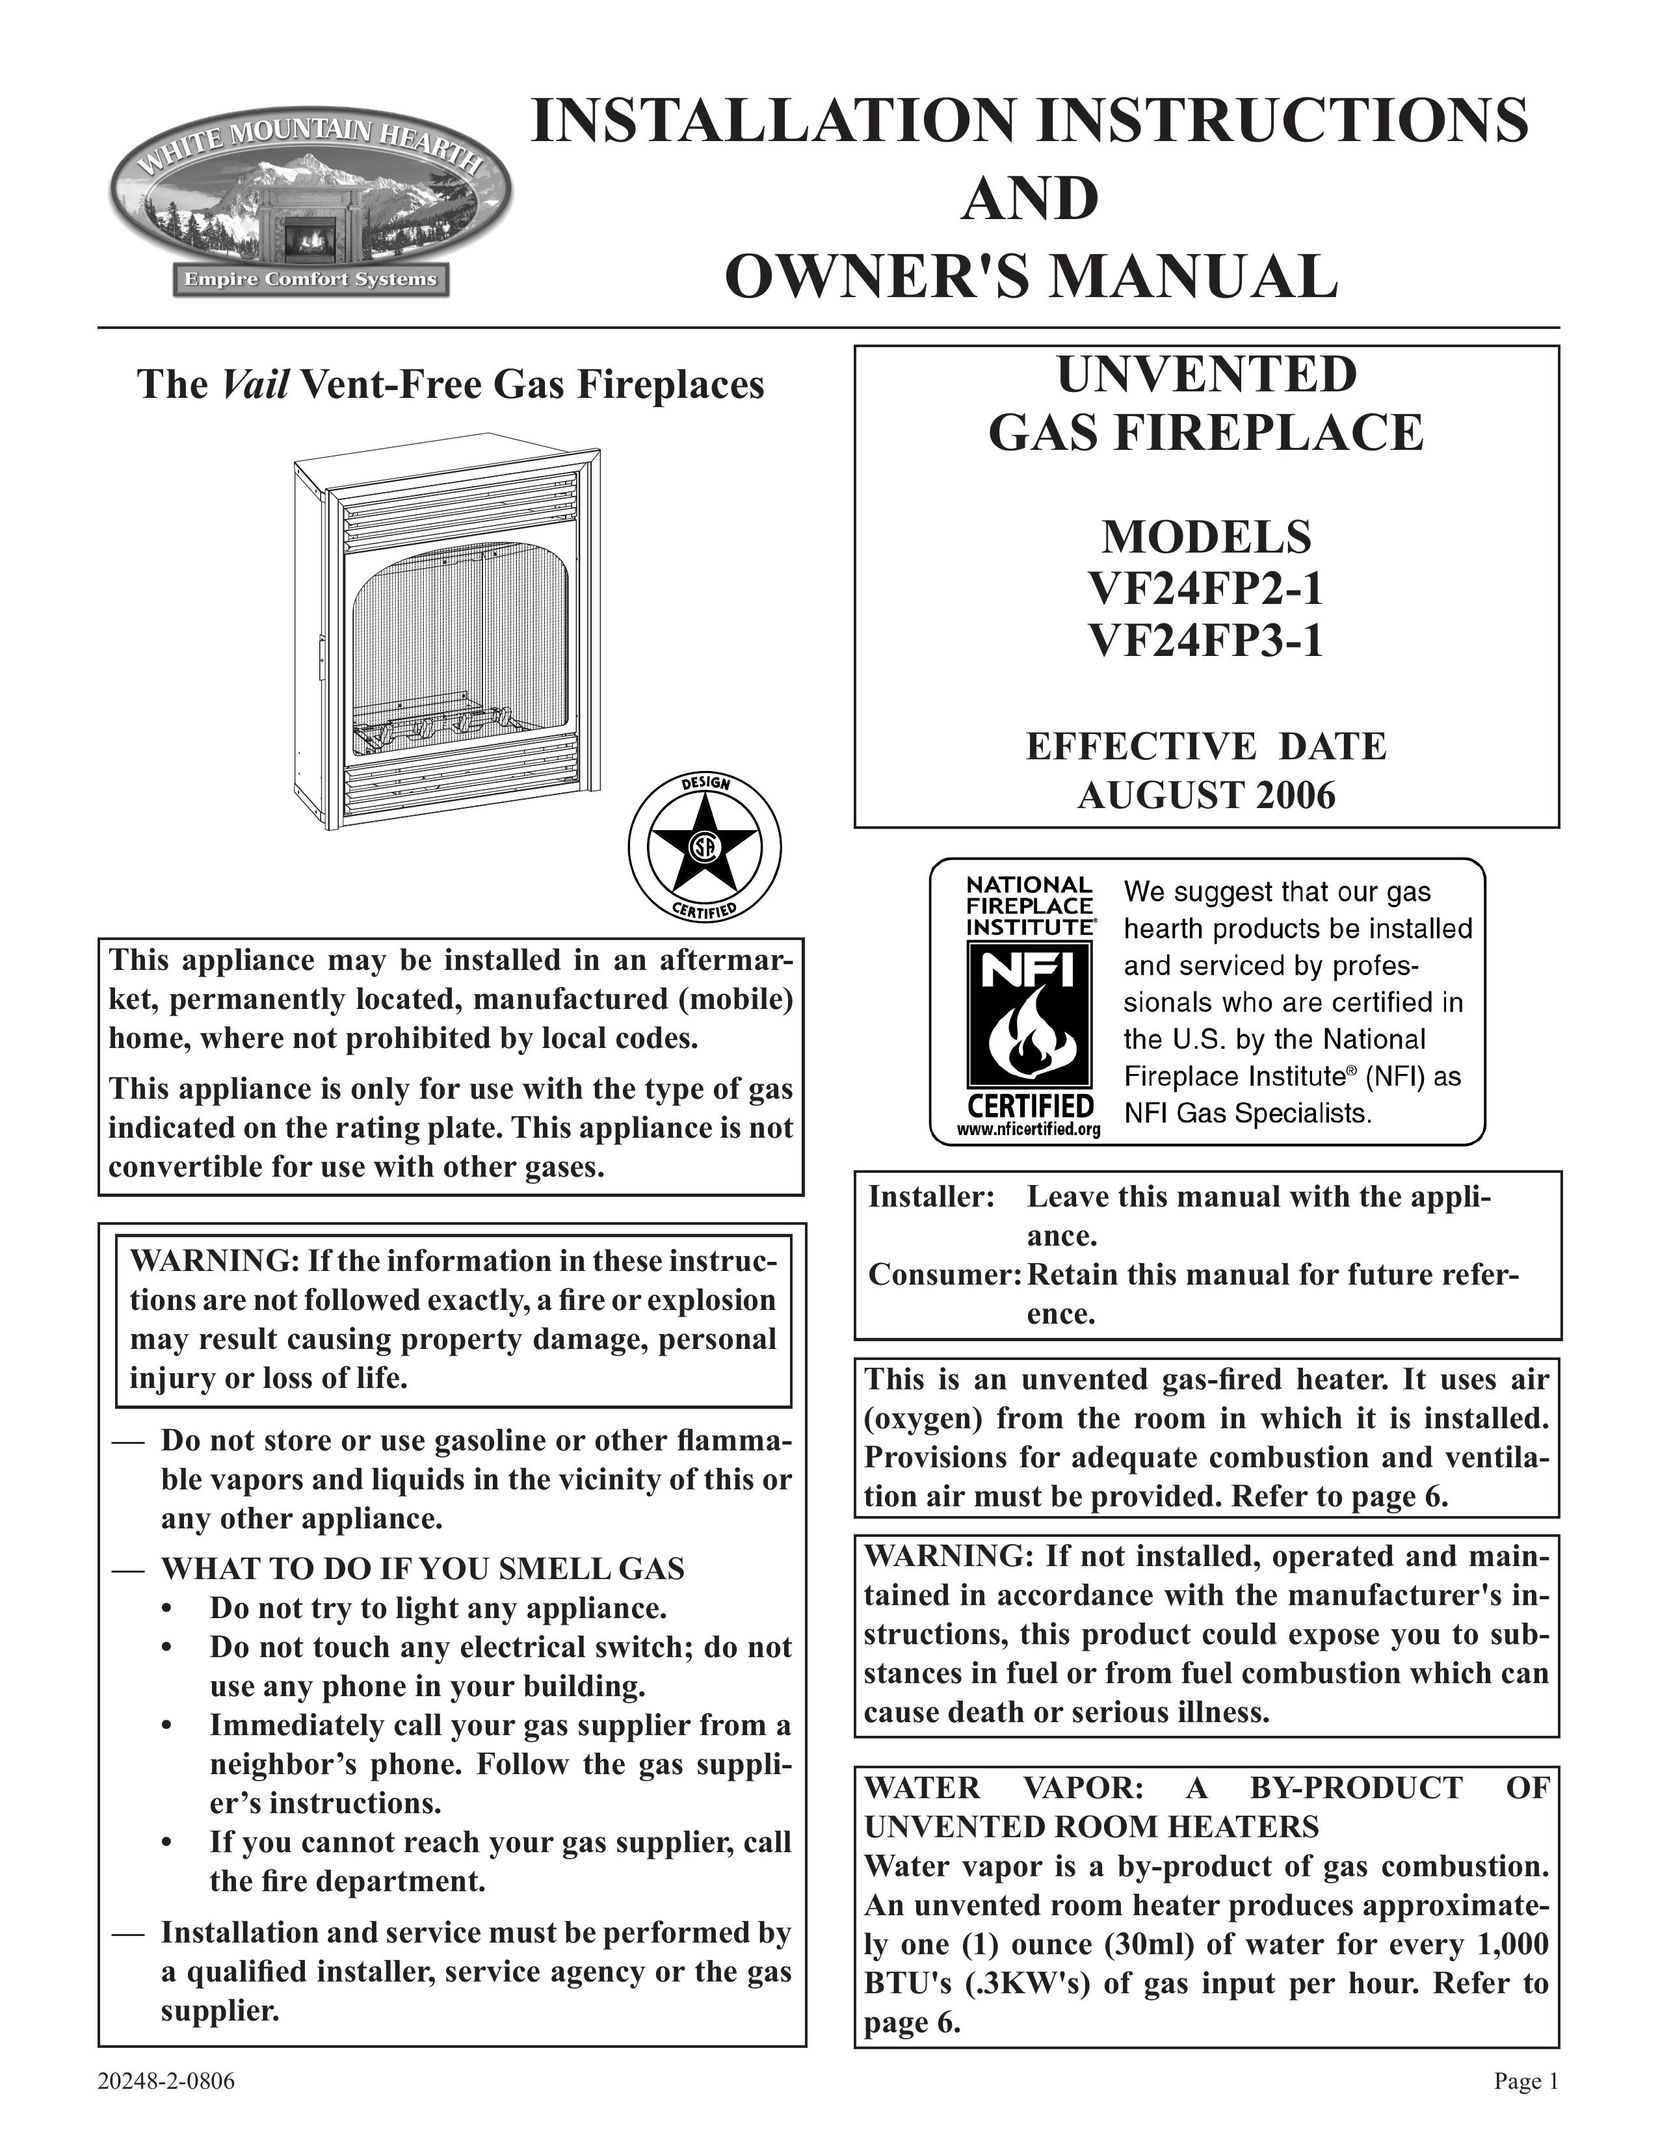 Empire Comfort Systems VF24FP3-1 Indoor Fireplace User Manual